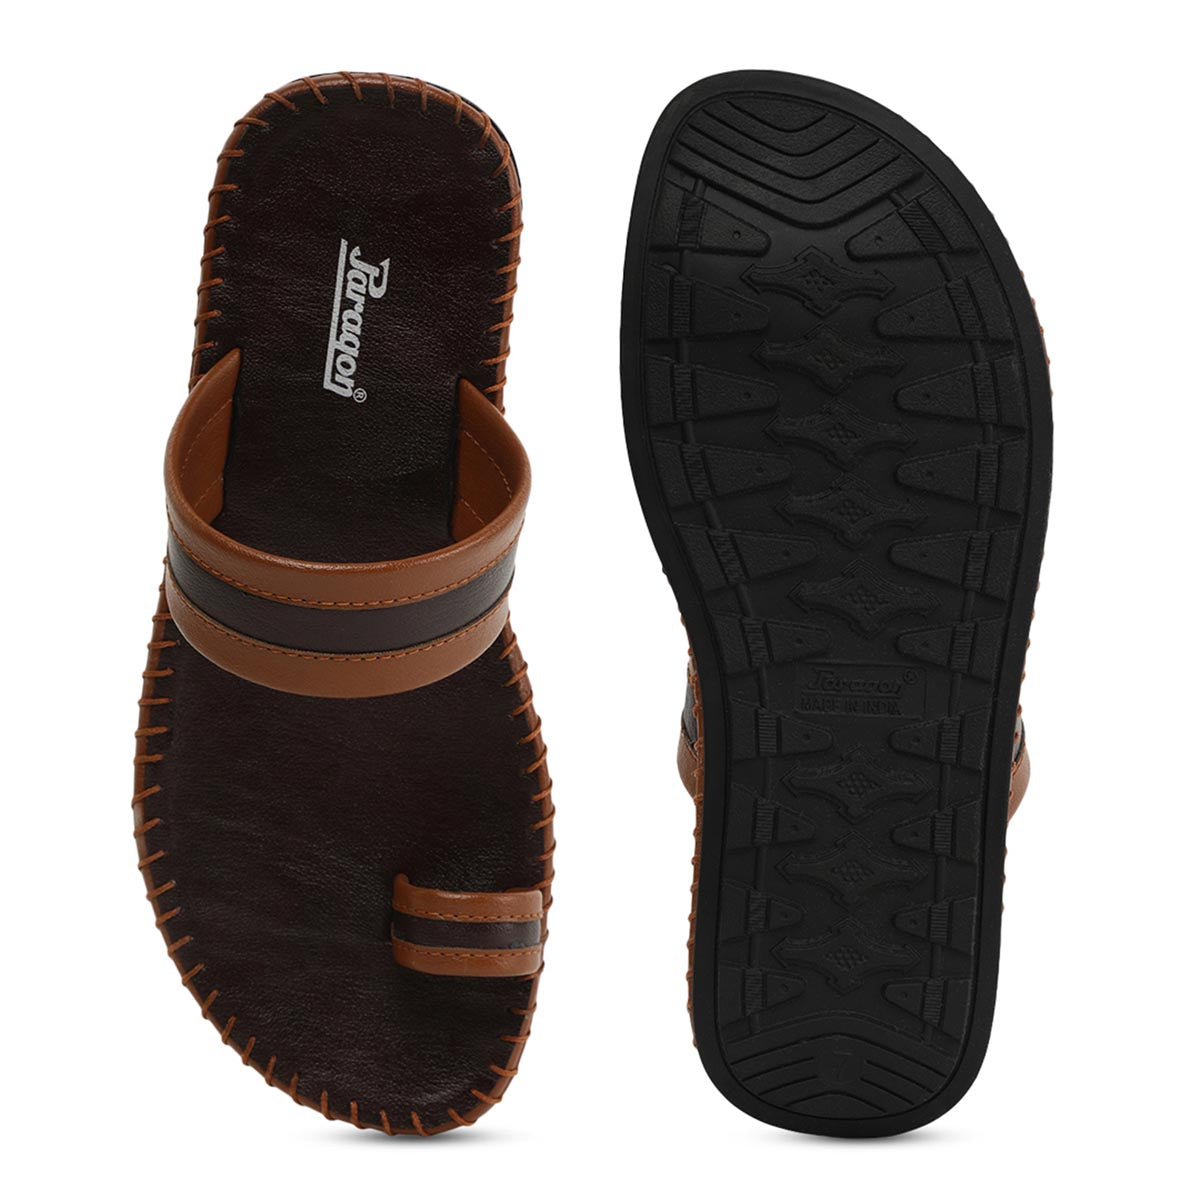 Paragon K2000G Men Stylish Sandals | Comfortable Sandals for Daily Outdoor Use | Casual Formal Sandals with Cushioned Soles